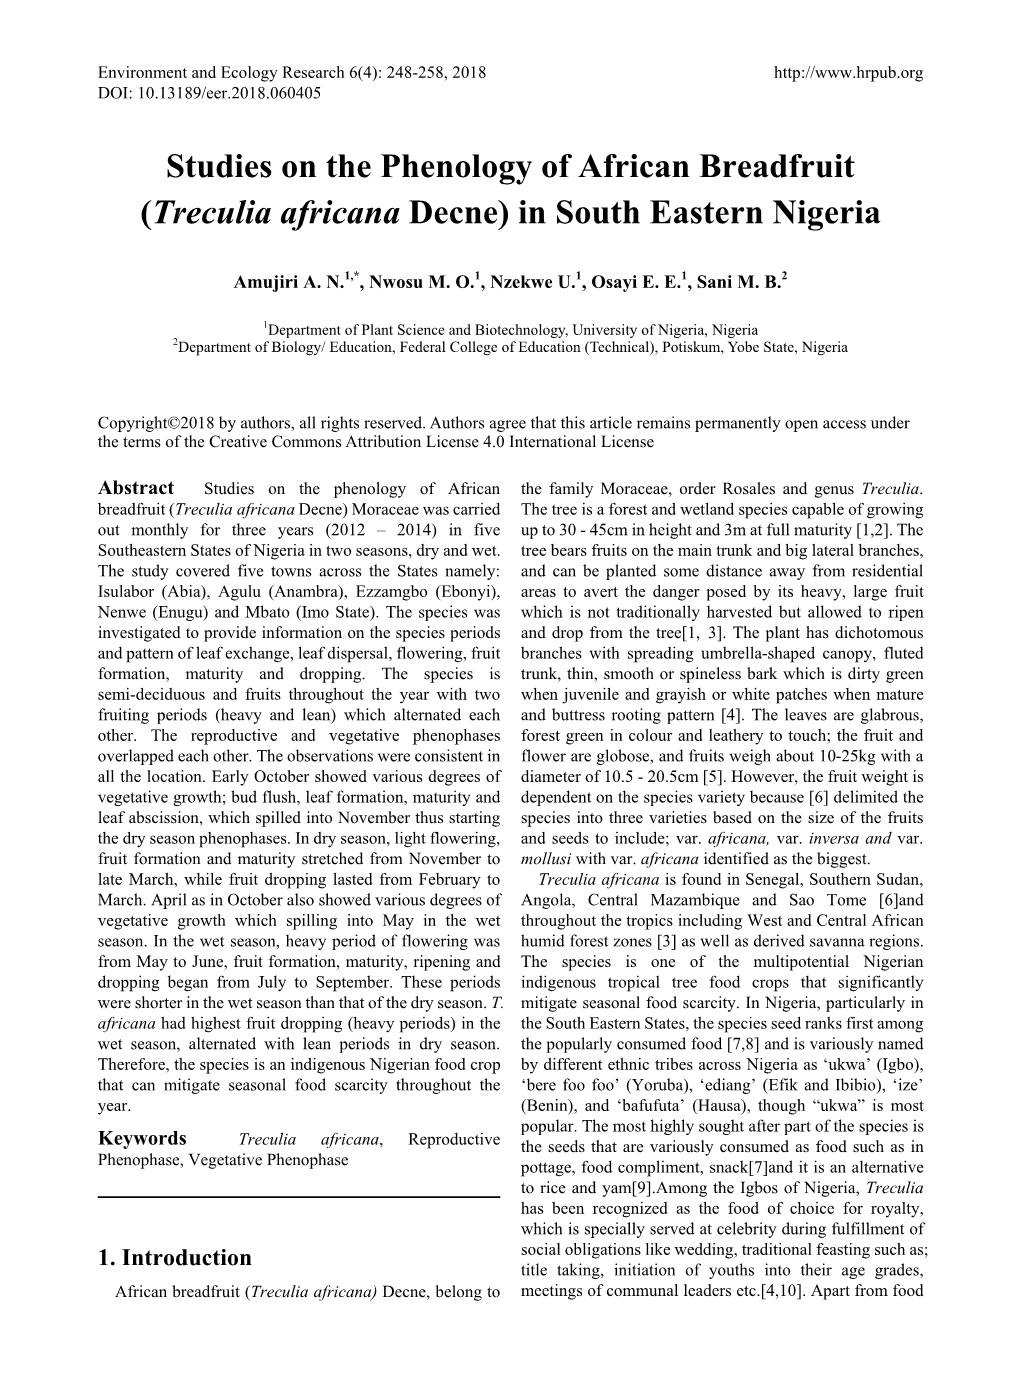 Studies on the Phenology of African Breadfruit (Treculia Africana Decne) in South Eastern Nigeria